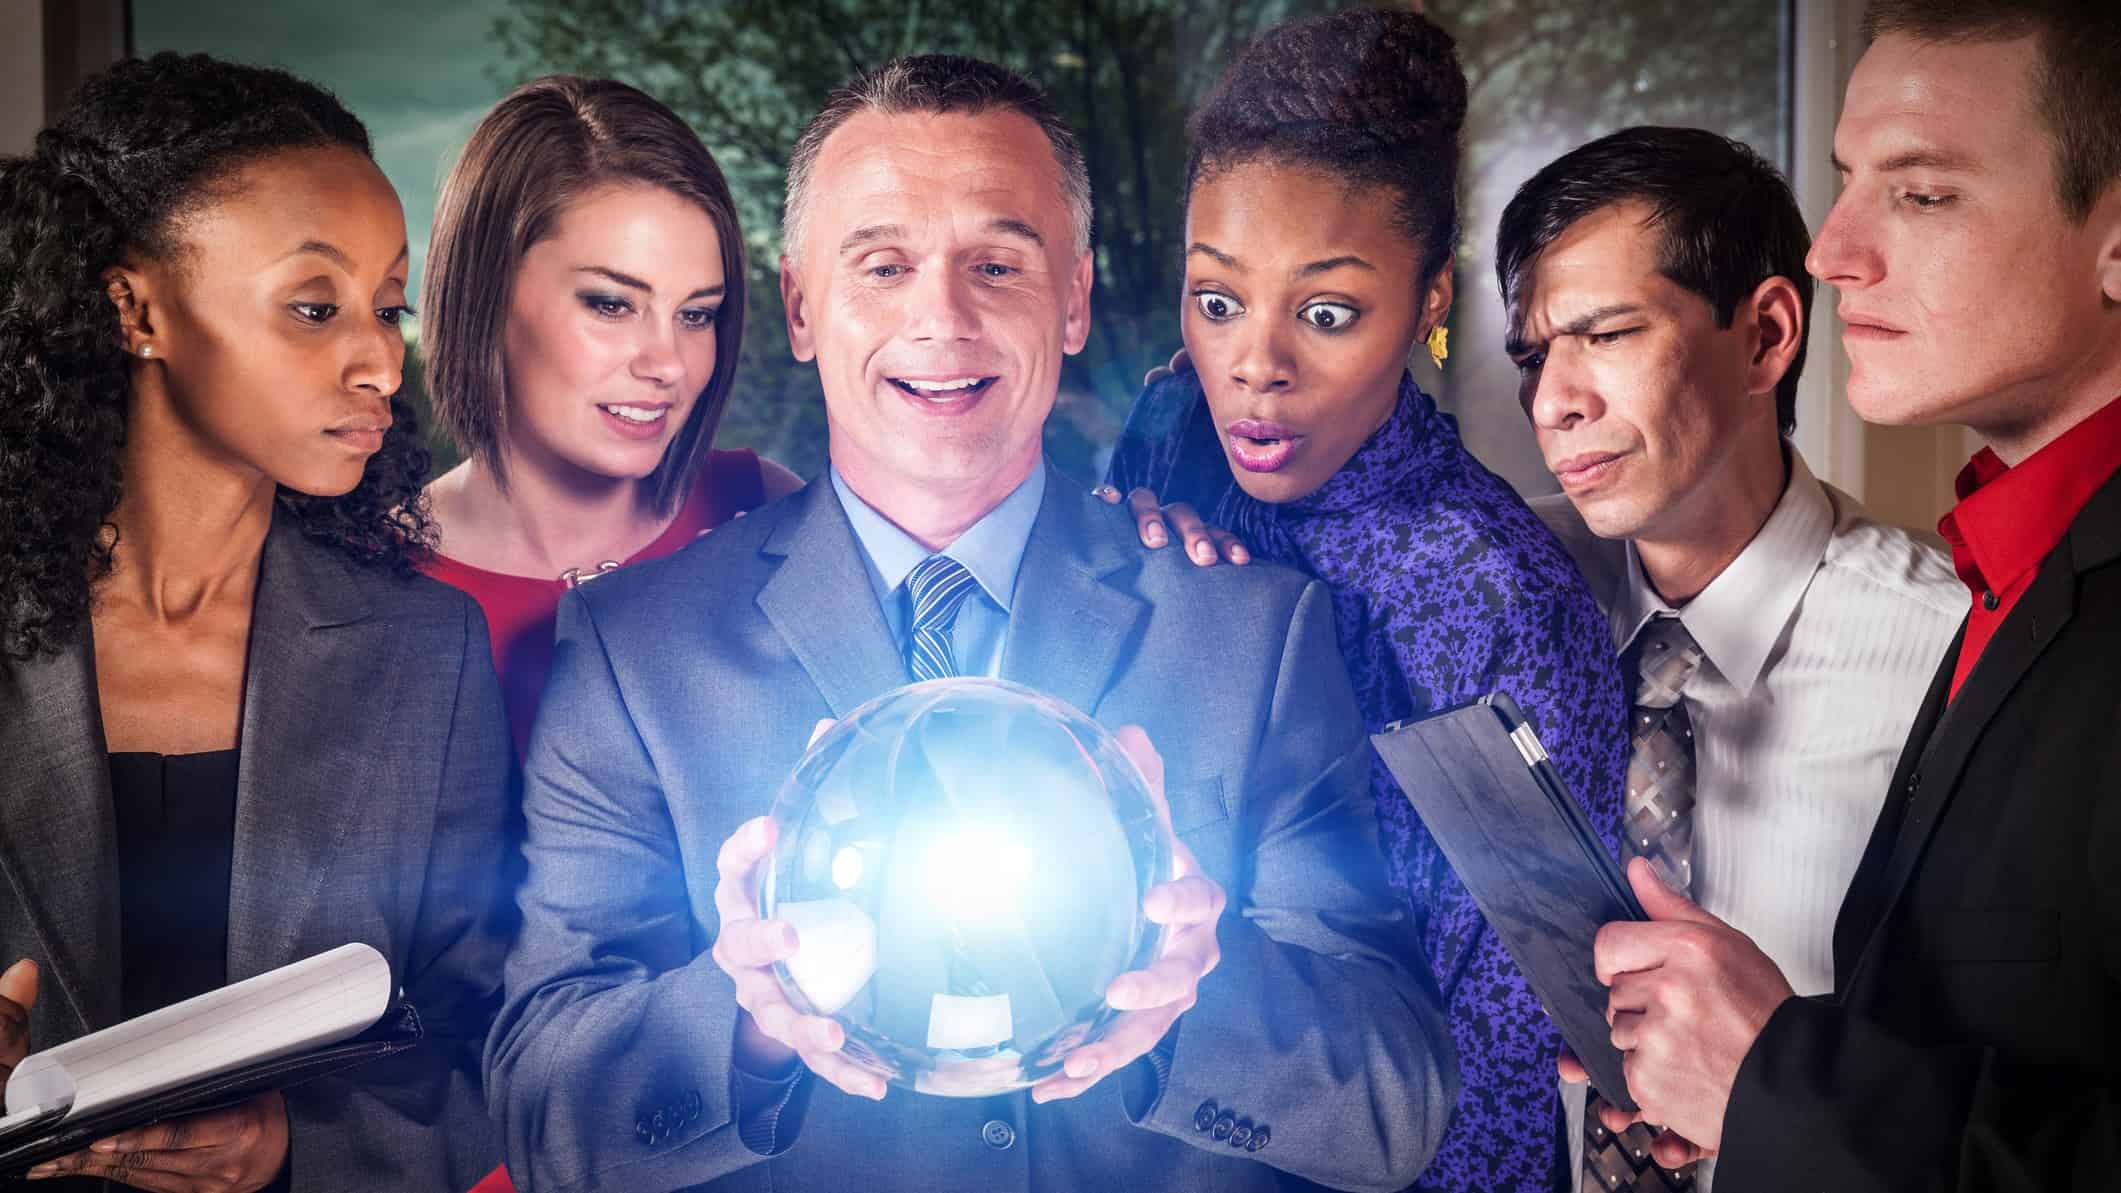 a group of people stand examining a large glowing cystral ball held in the hands of one of the group members while the others regard it with various expressions of wonder, curiousity and scepticism.